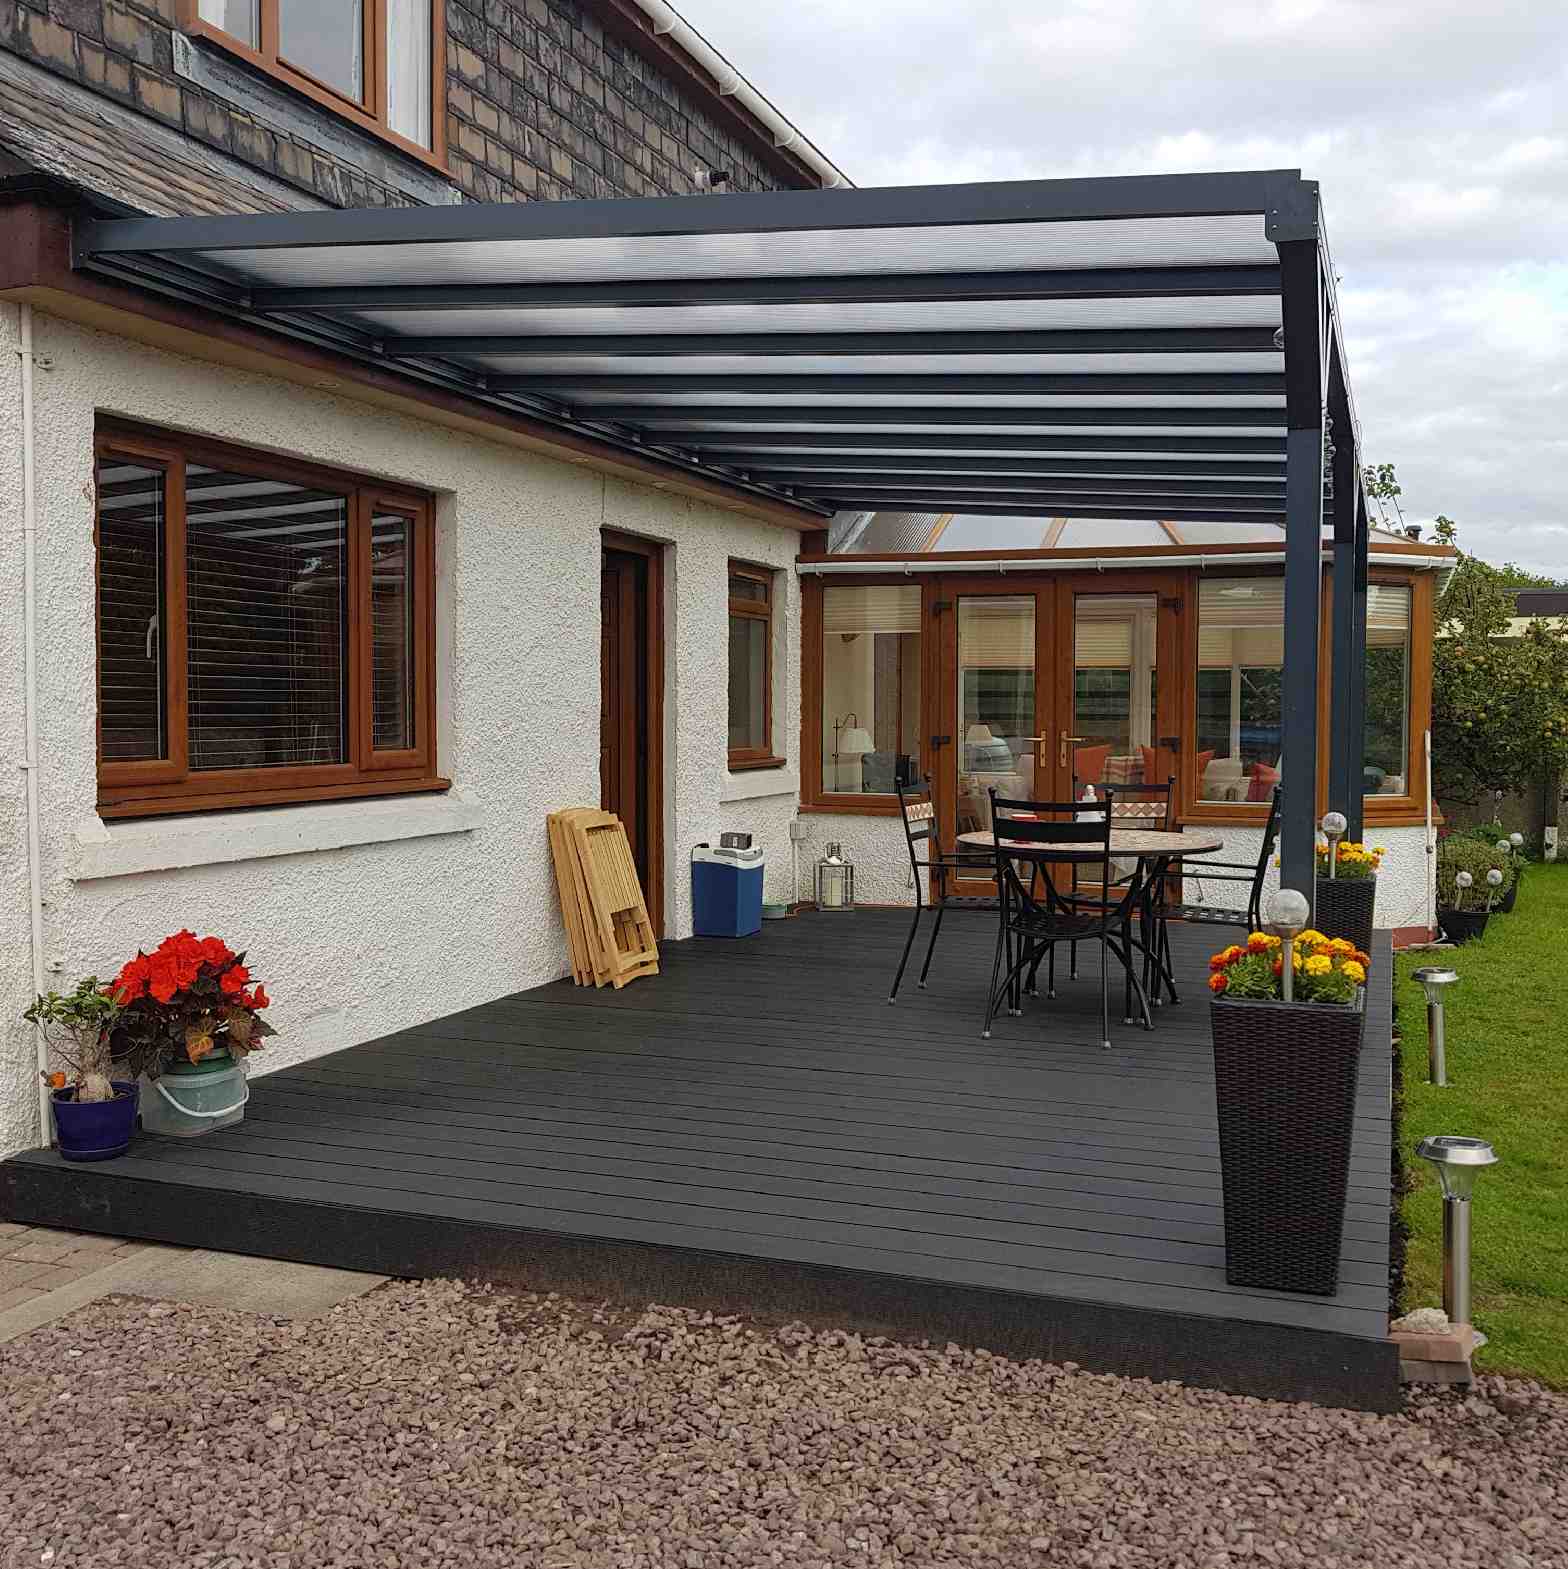 Buy Omega Verandah, Anthracite Grey, 16mm Polycarbonate Glazing - 9.5m (W) x 1.5m (P), (5) Supporting Posts online today